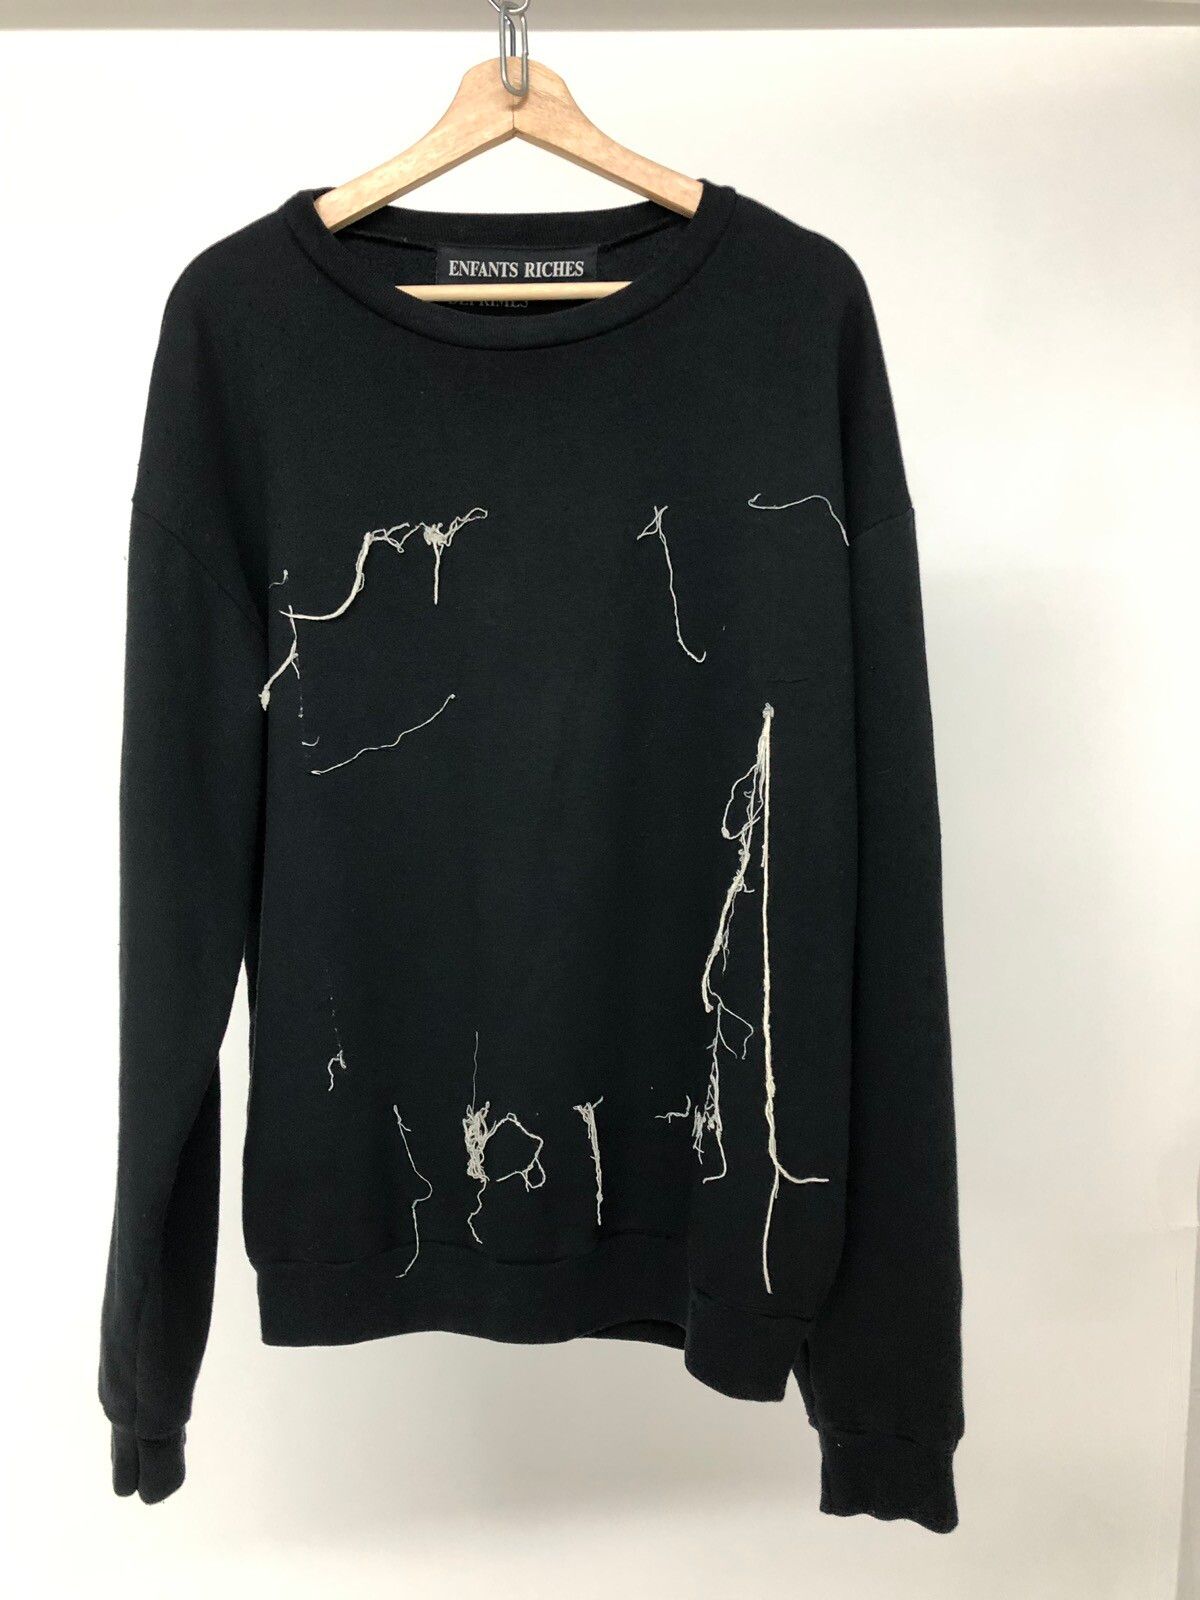 Enfants Riches Deprimes Distressed thread sweater | Grailed